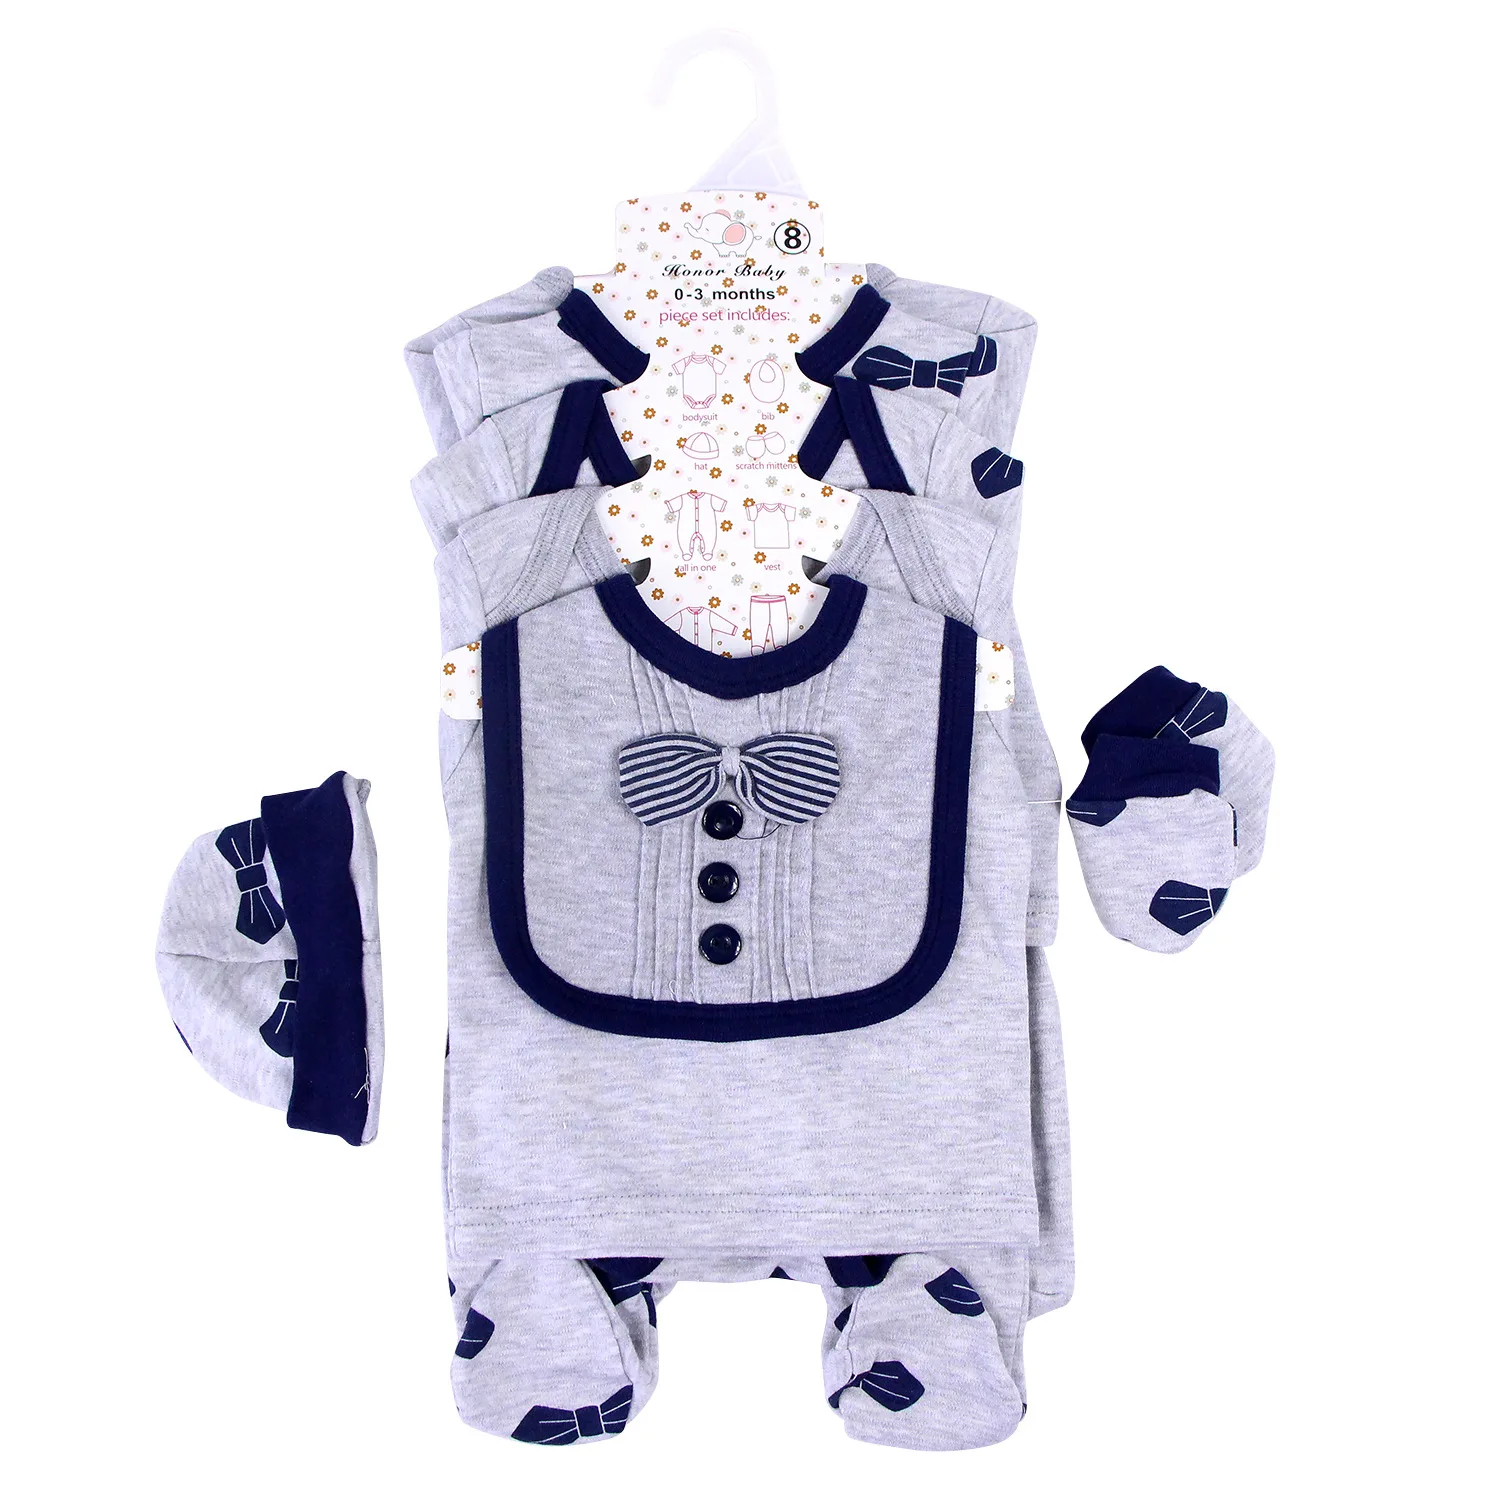 Summer hot sell organic cotton baby clothes romper newborn baby clothes sets in 8 pcs